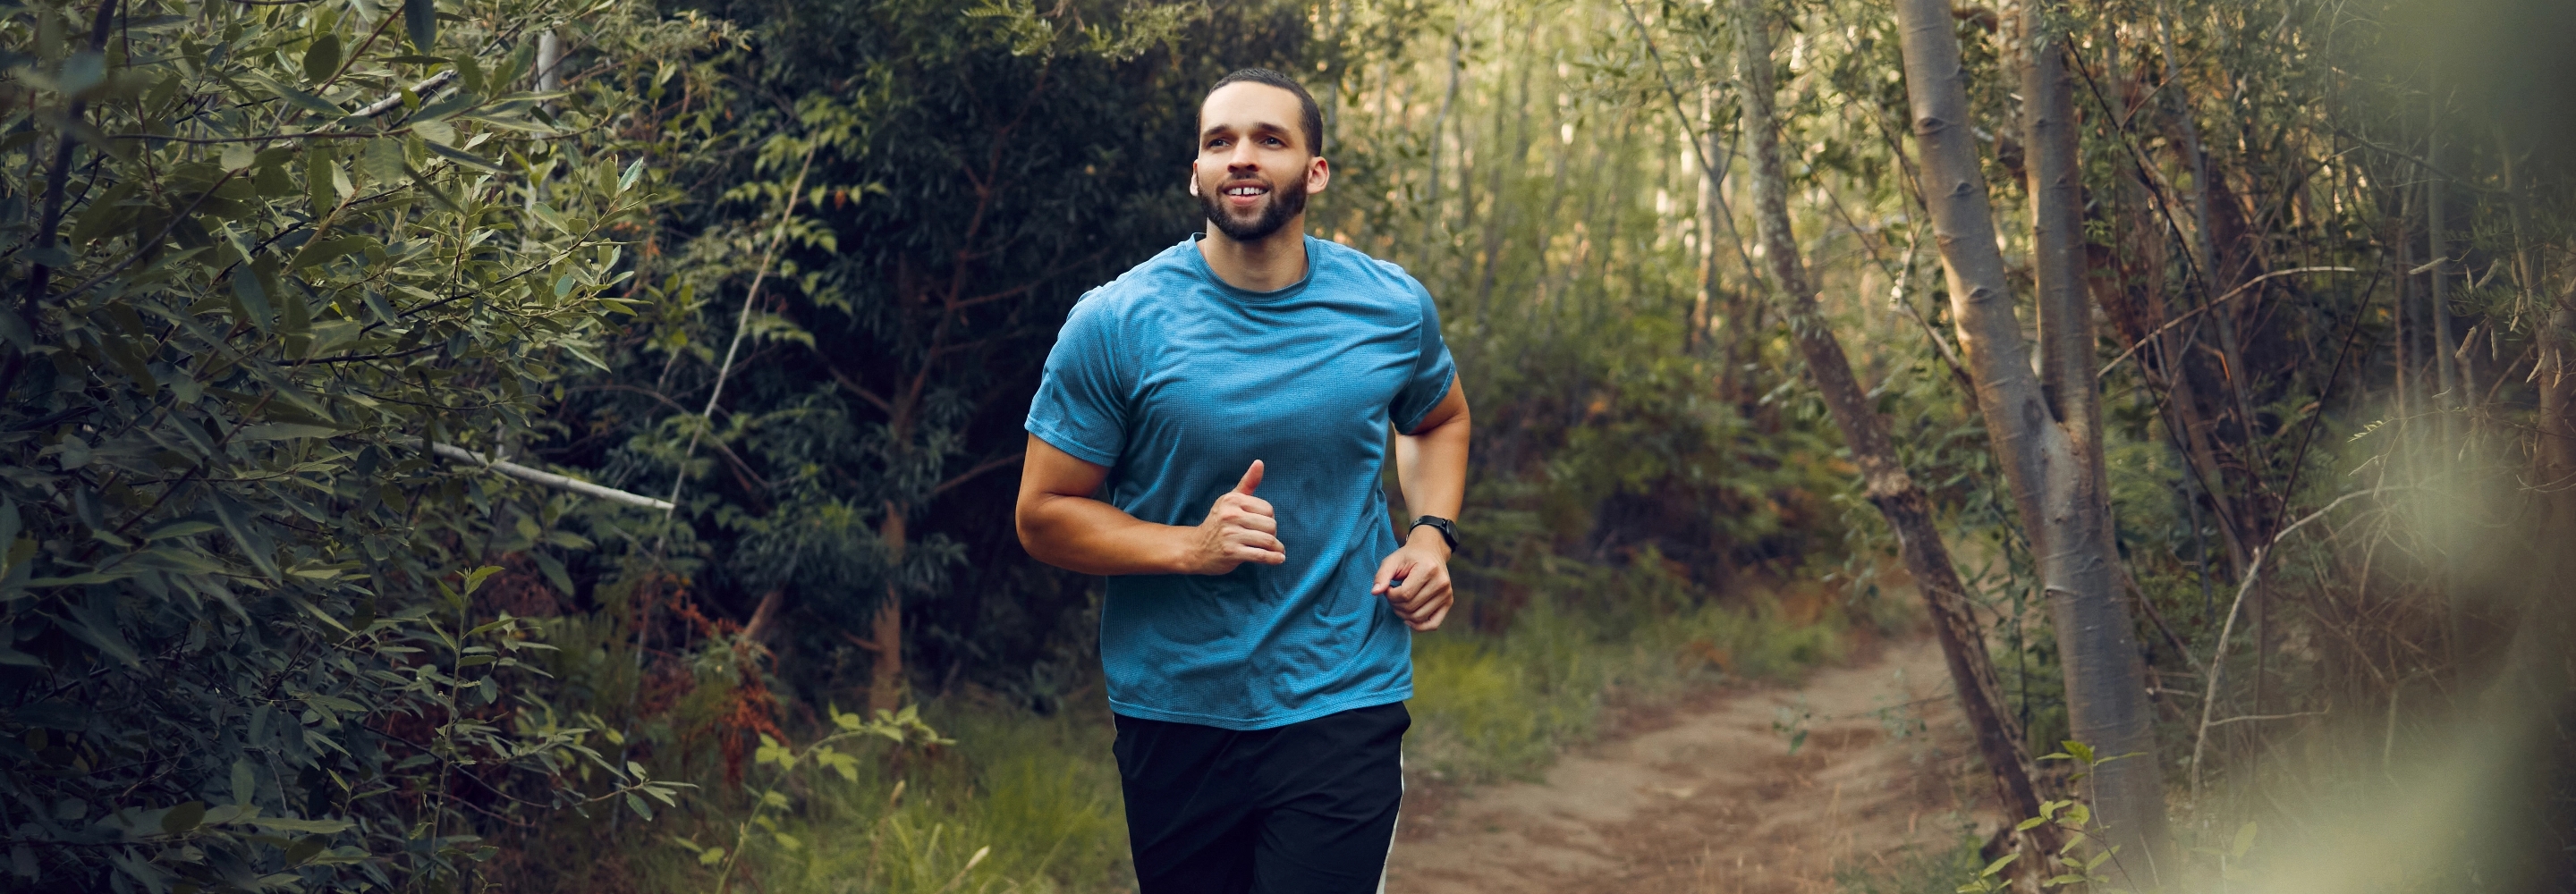 man-running-and-fitness-on-forest.jpg